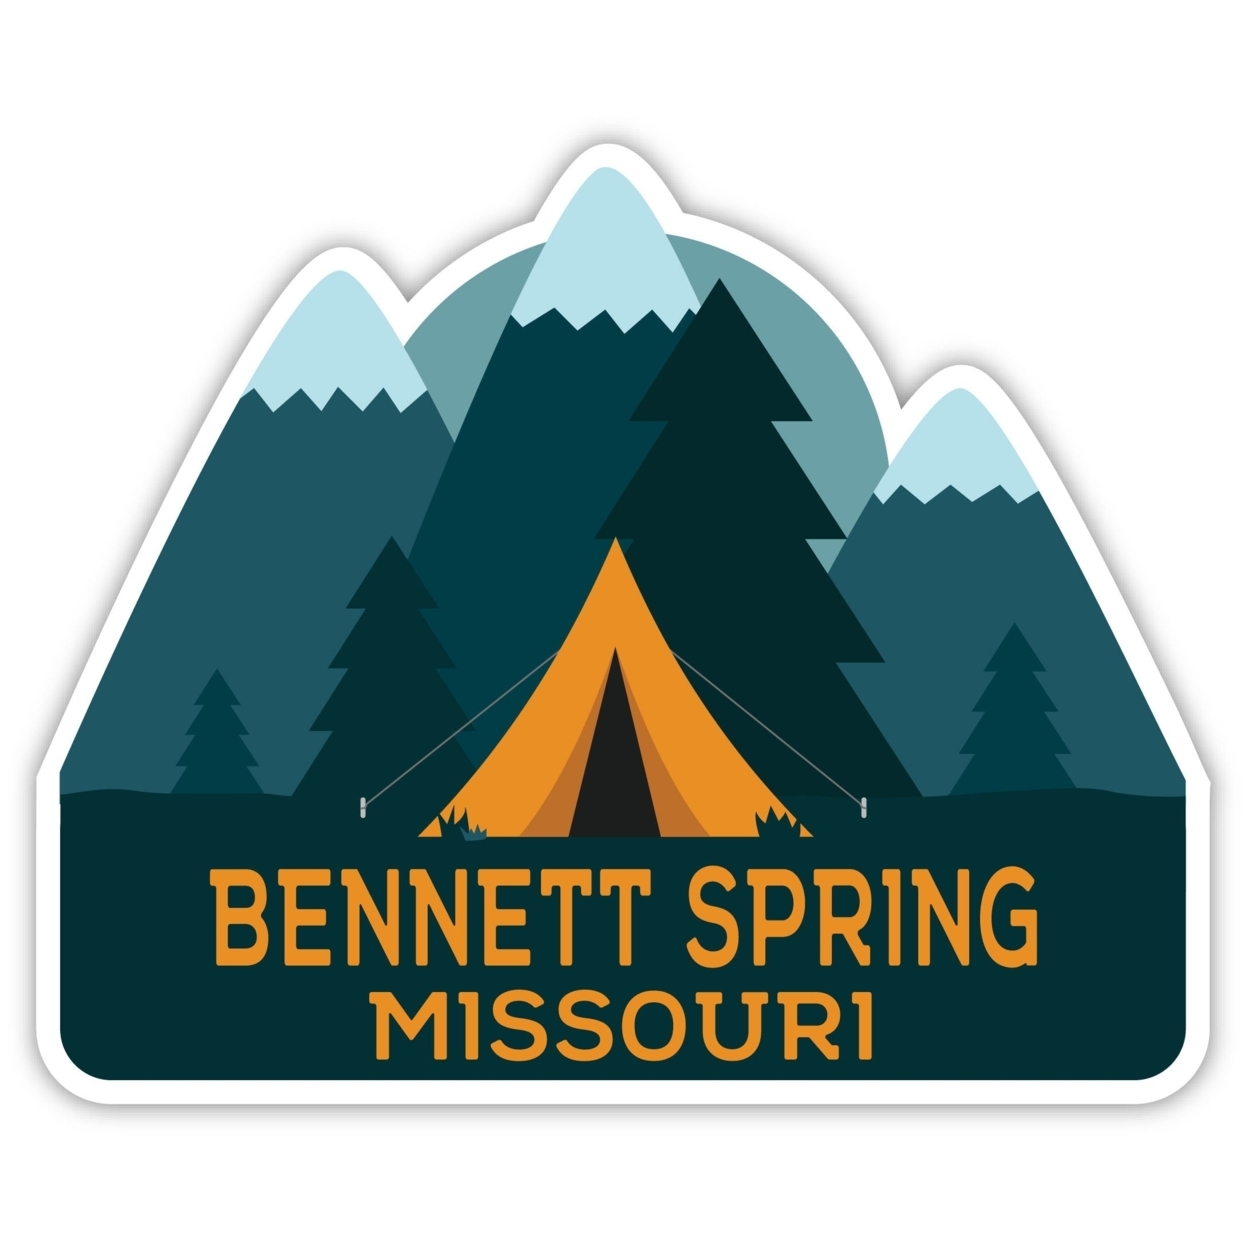 Bennett Spring Missouri Souvenir Decorative Stickers (Choose Theme And Size) - 4-Pack, 6-Inch, Tent